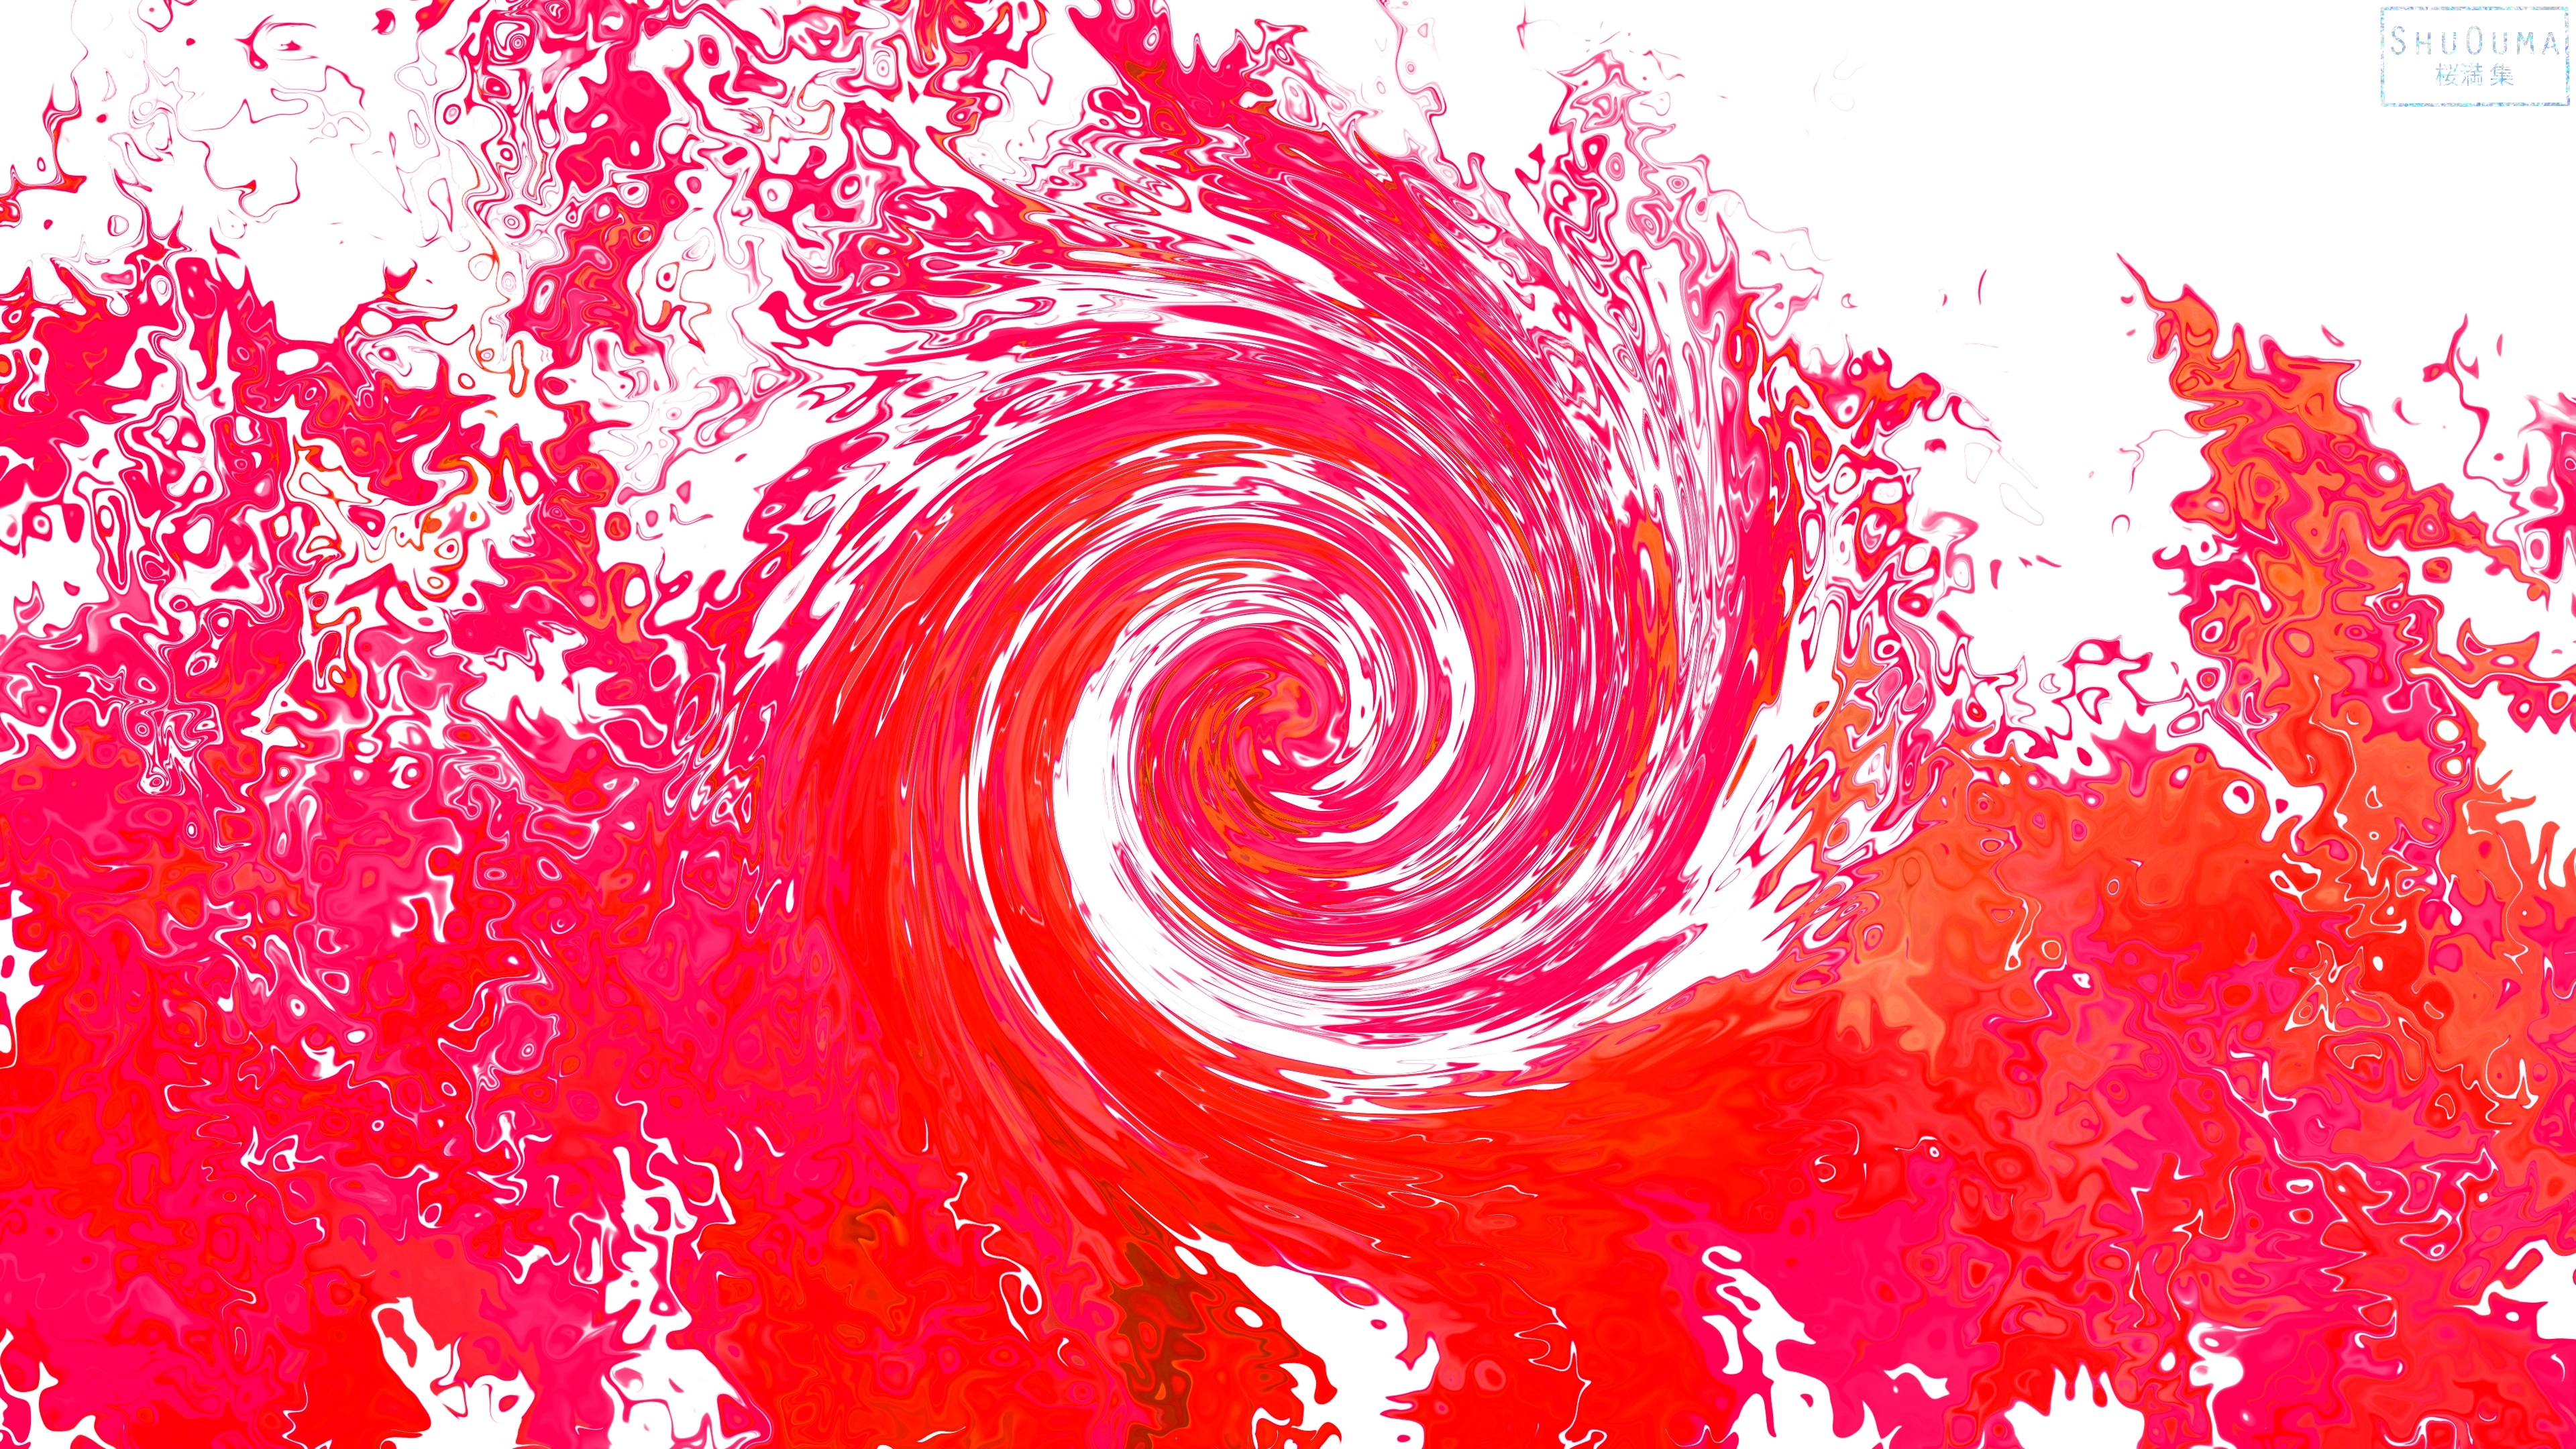 Abstract Pink 3840x2160